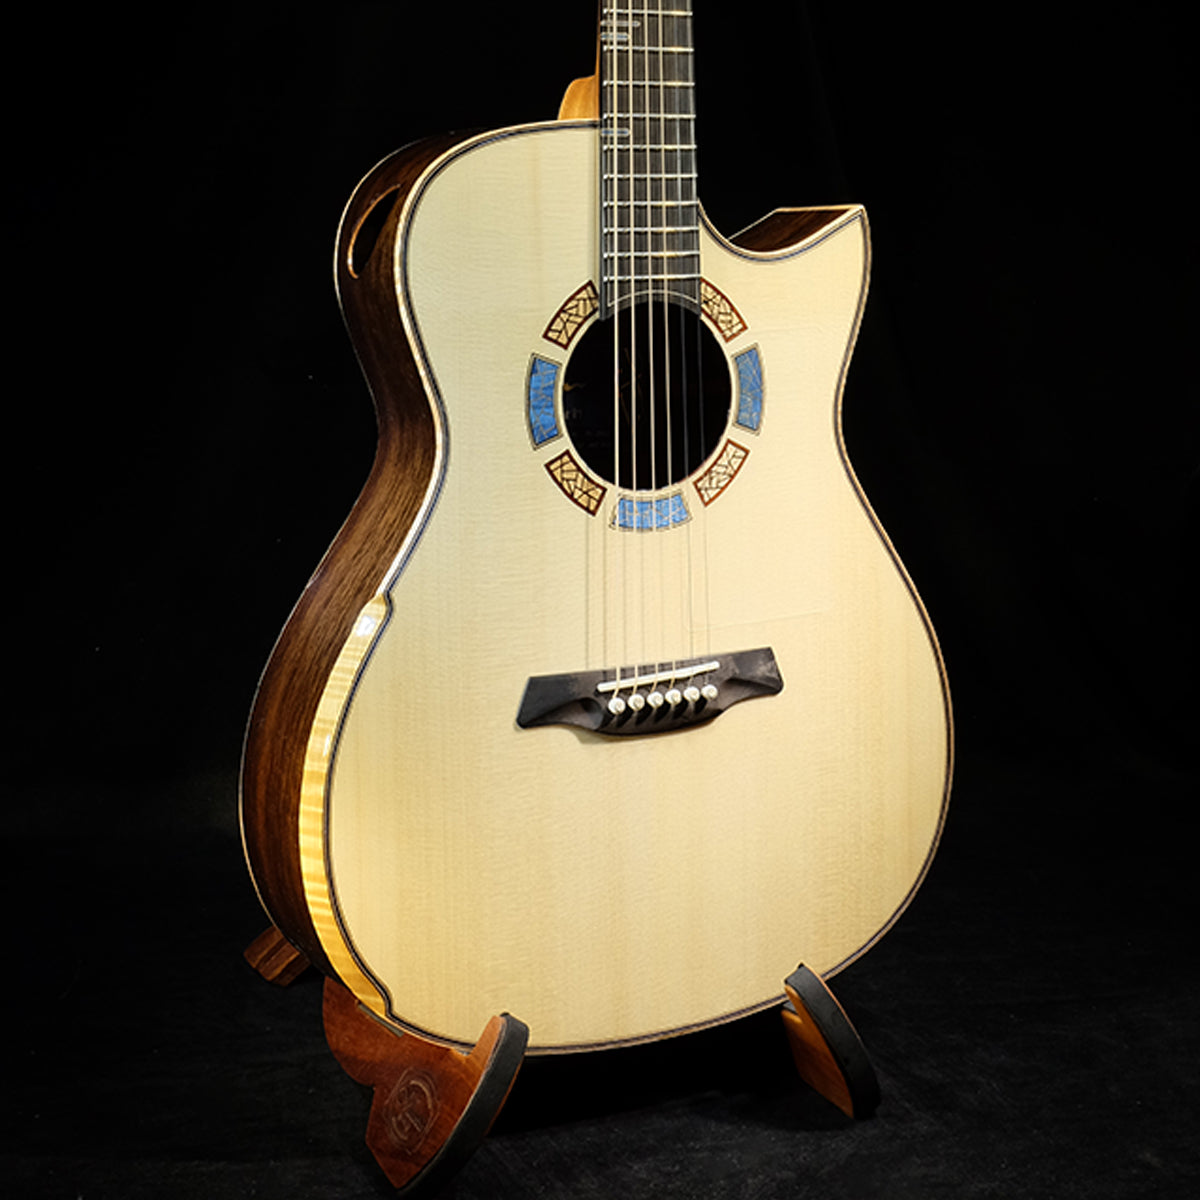 Blue Label OM Swiss Spruce with Madagascar Rosewood | #89